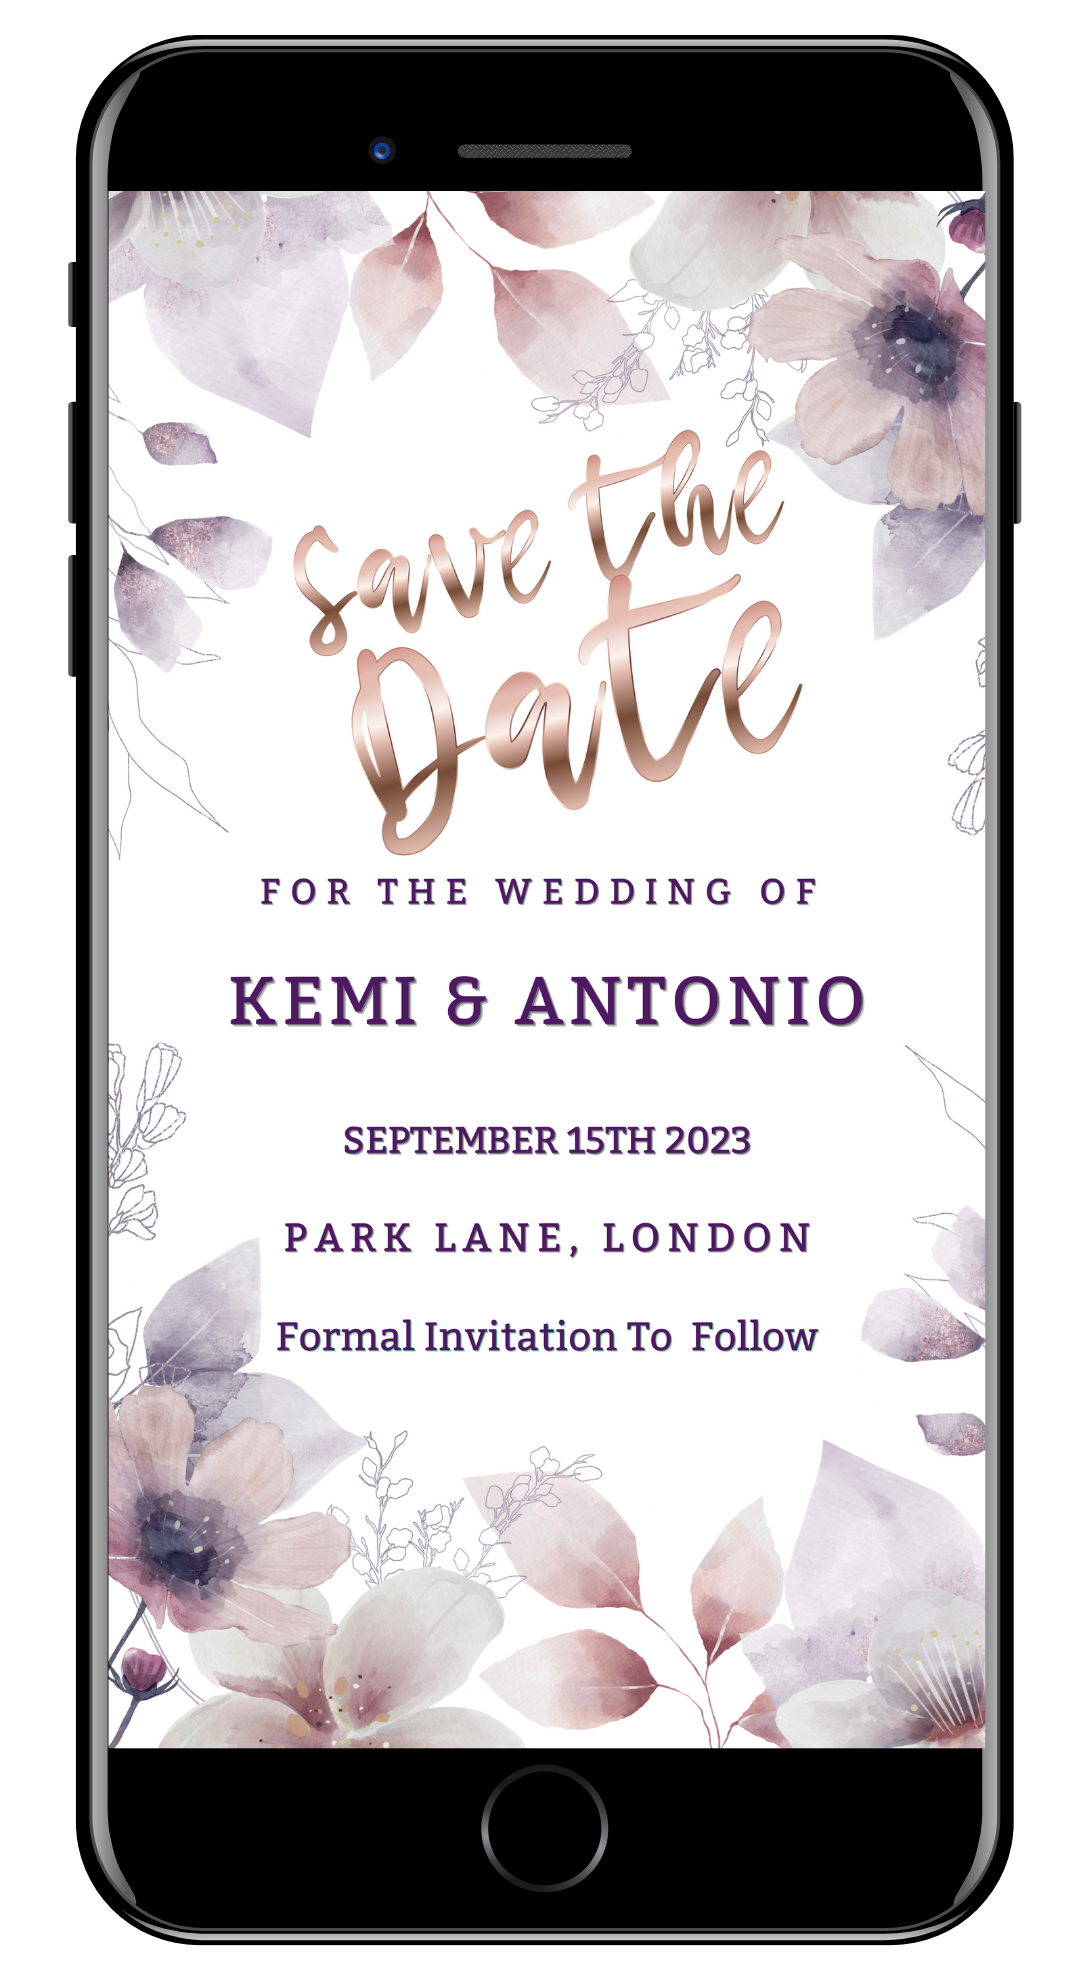 Boho Rustic Floral Save The Date Evite displayed on a smartphone screen, showcasing editable text and purple floral design elements.